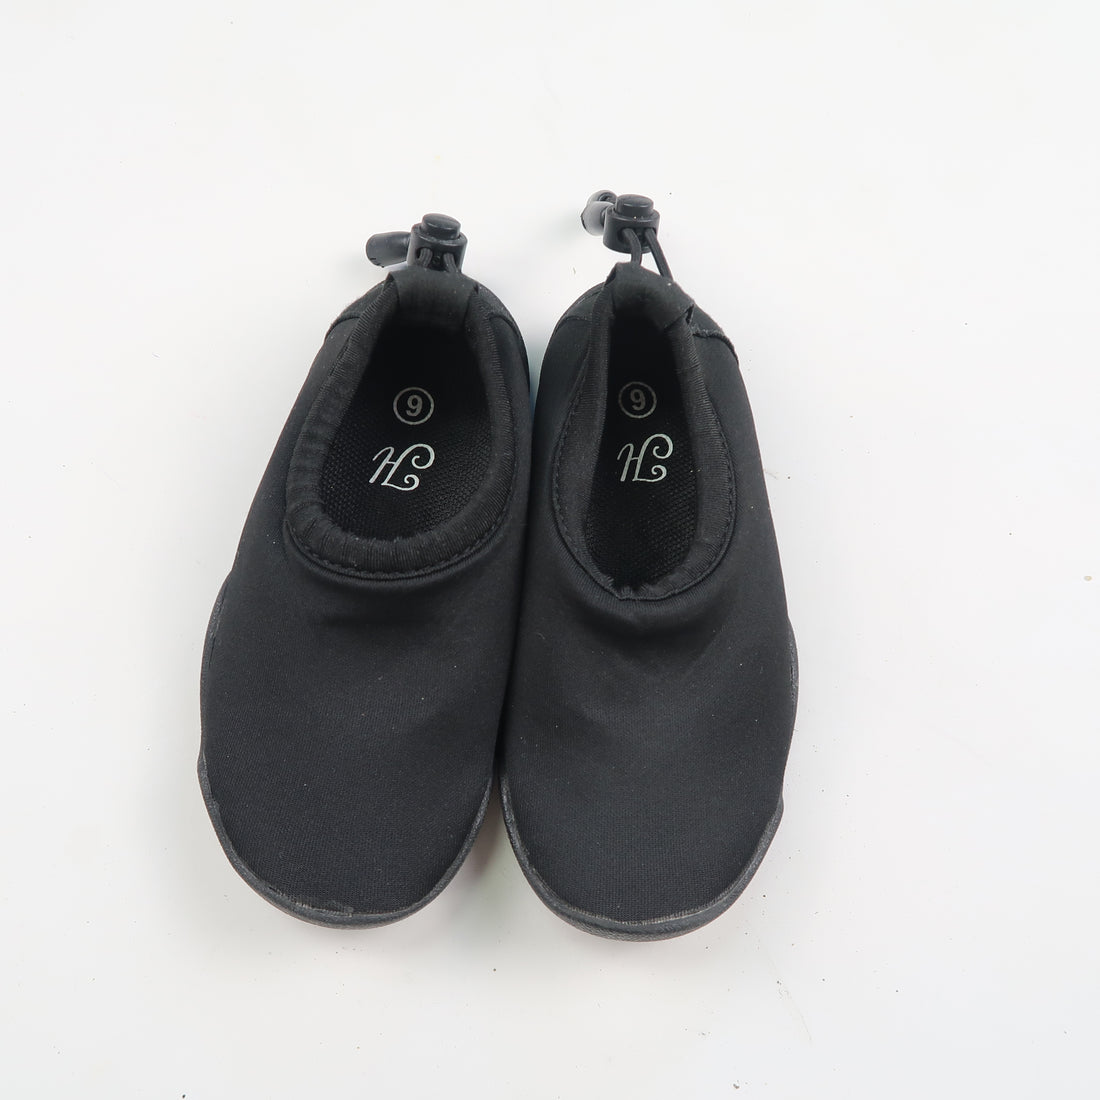 HoneySuckle Swim Co - Water Shoes (Shoes - 6)